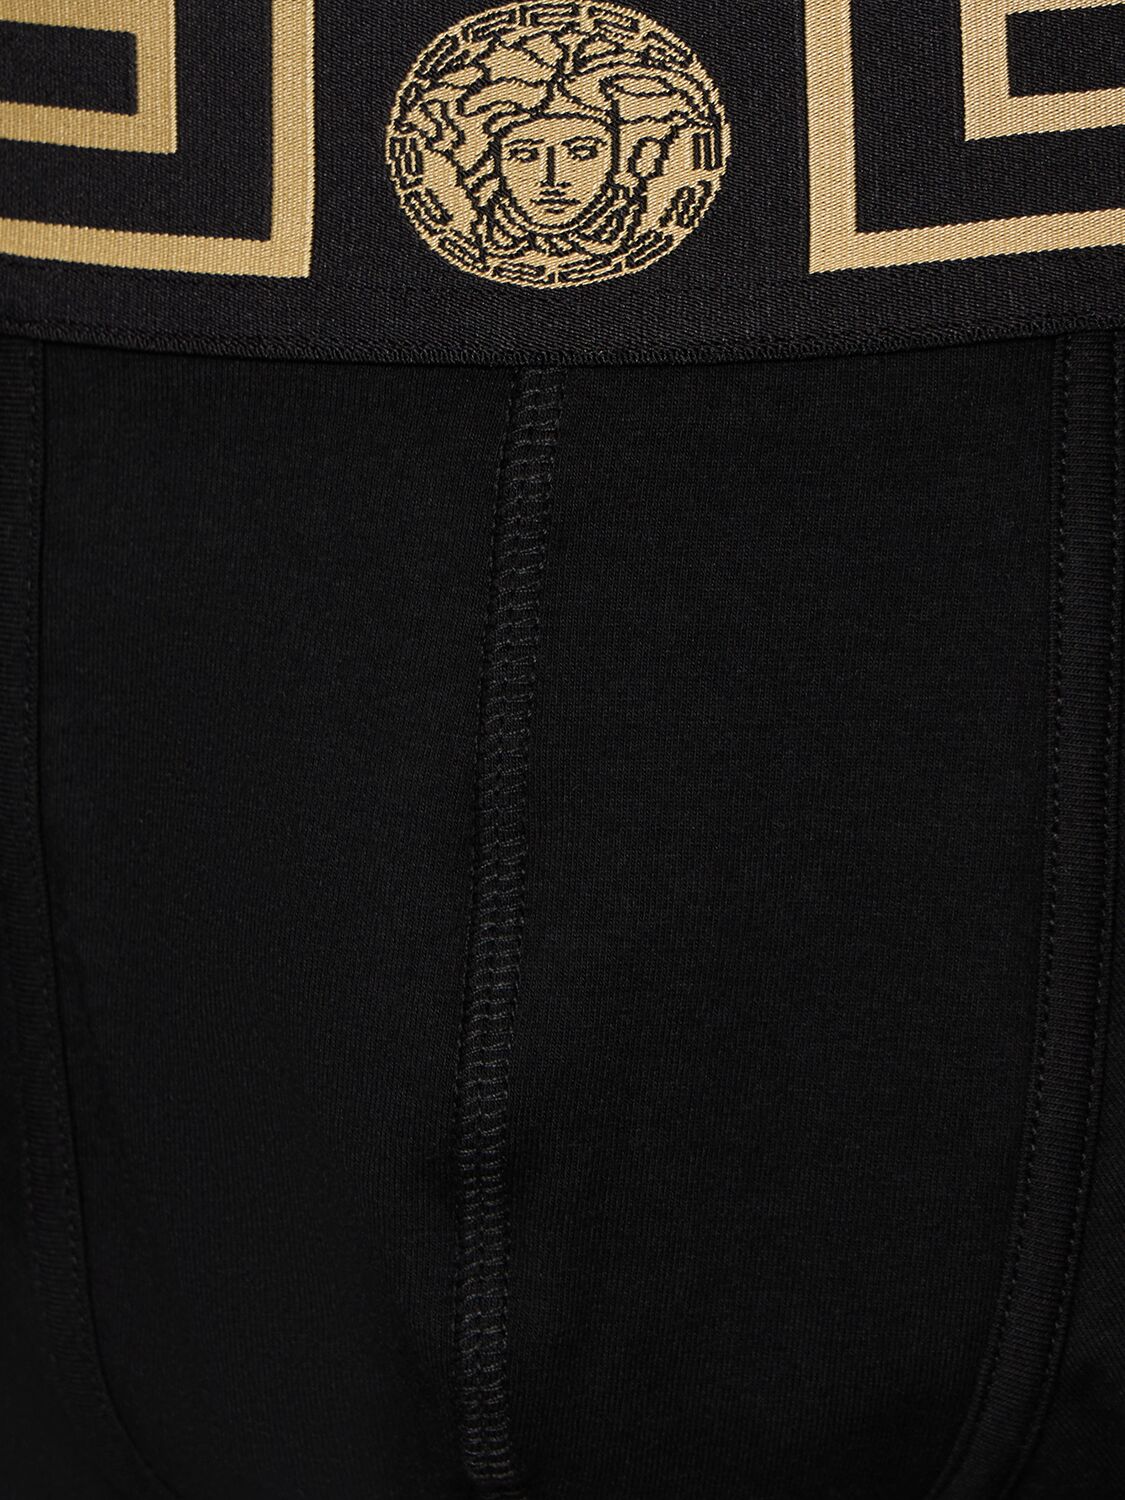 Shop Versace Pack Of 3 Greca Stretch Cotton Boxers In Black,gold